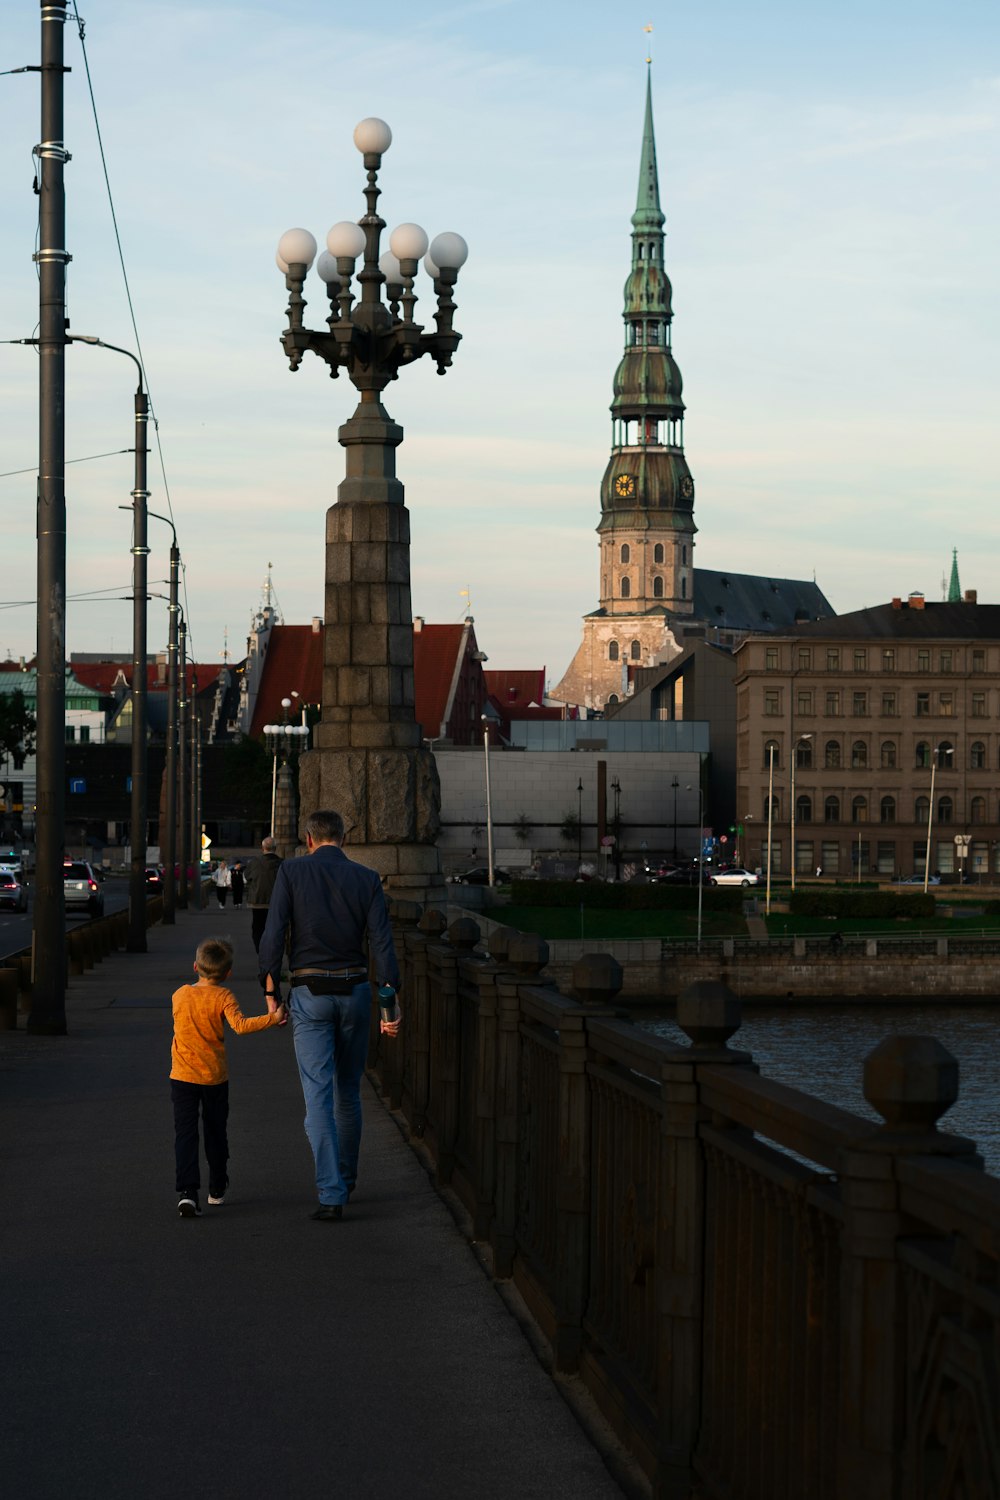 a man and a child walking on a bridge